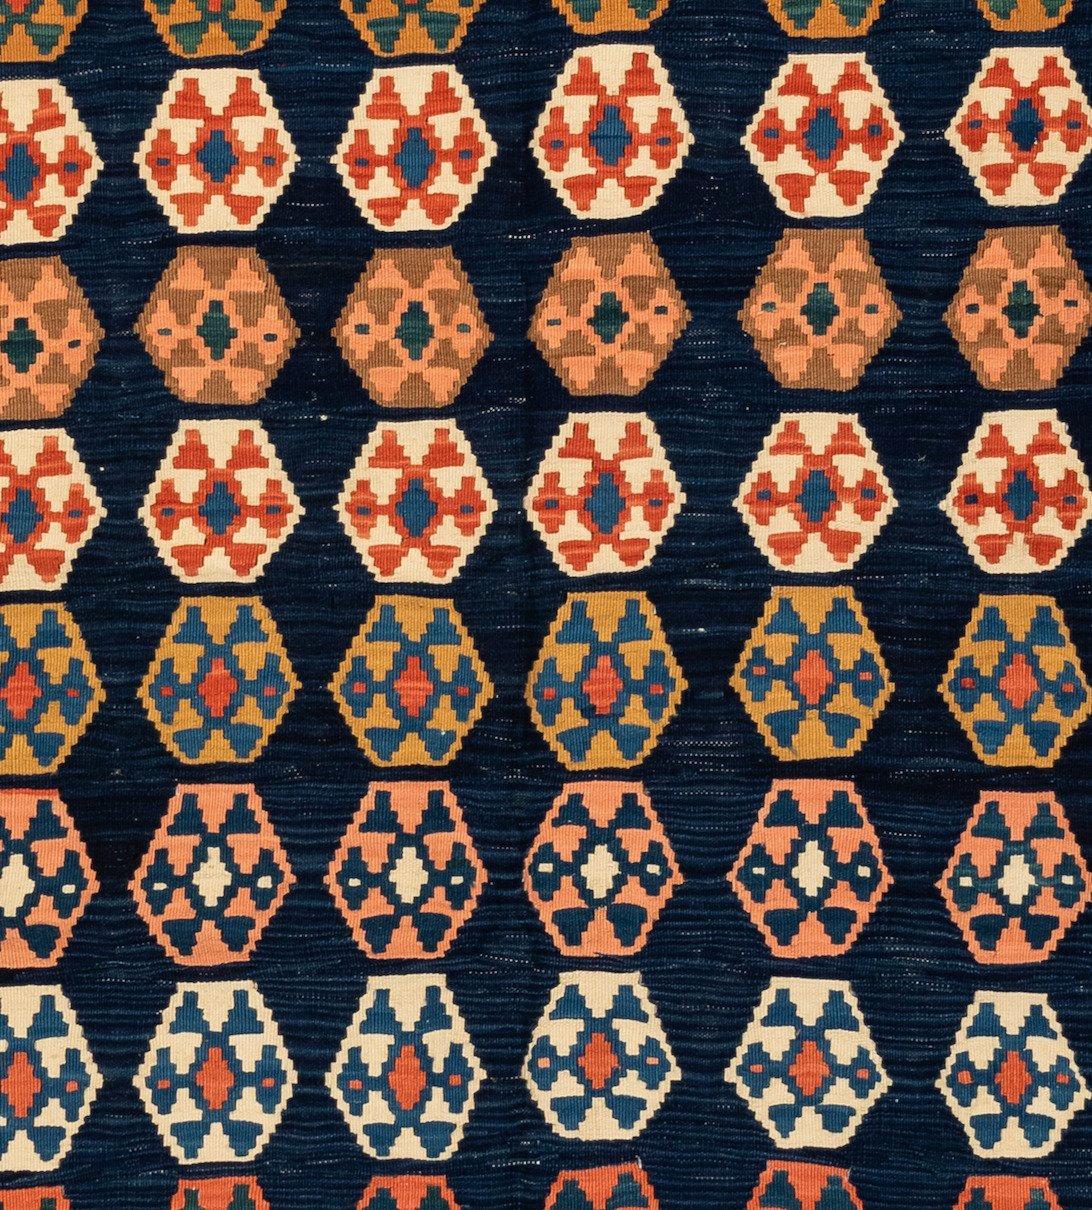 Kilim, a word of Turkish origin, denotes a pile less textile of many uses produced by one of several flat-weaving techniques that have a common or closely related heritage and are practiced in the geographical area that includes parts of Turkey